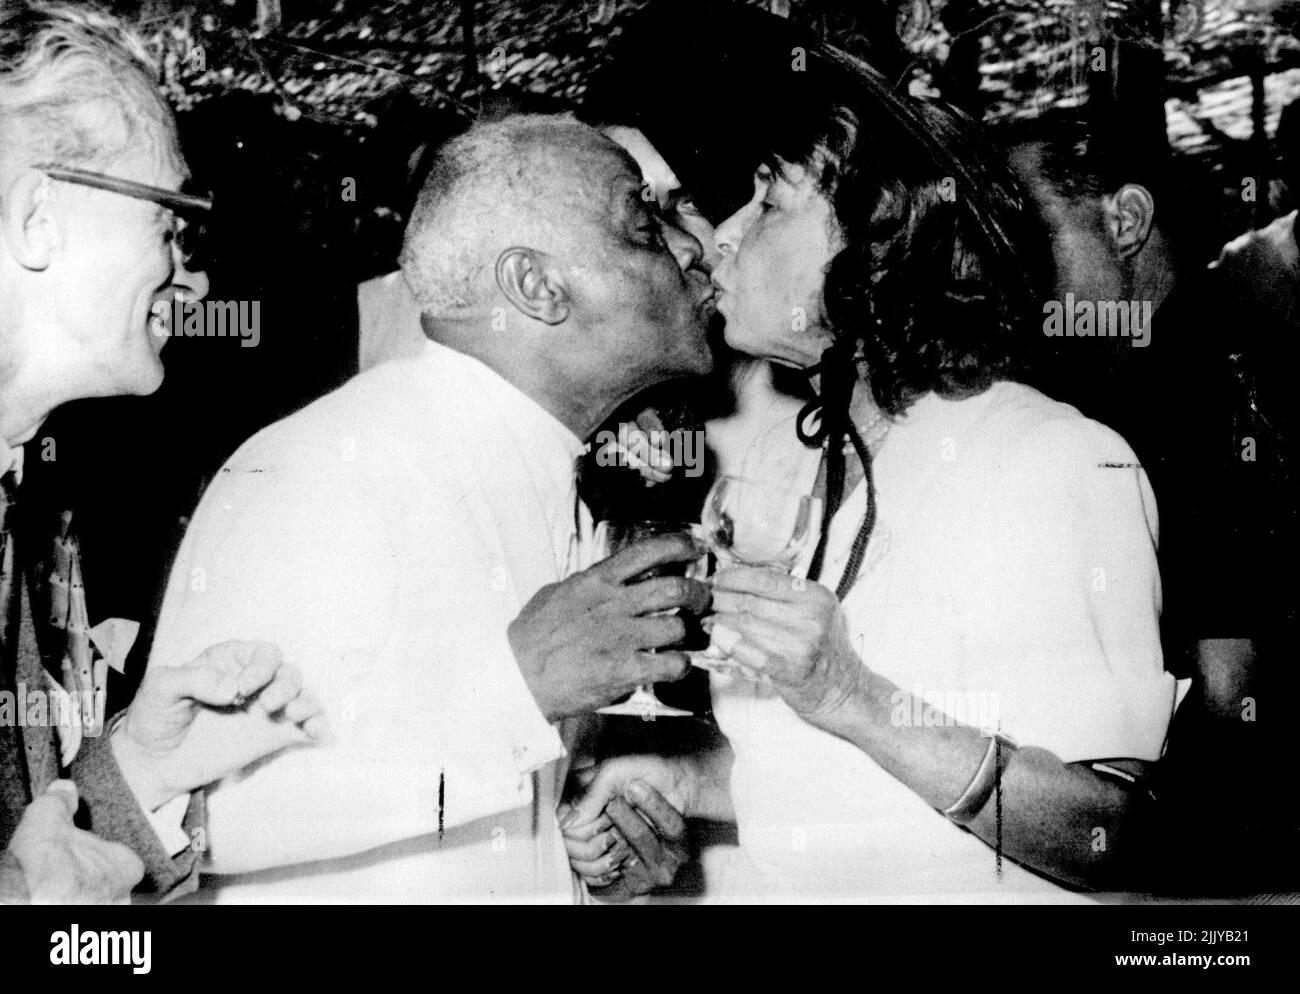 23 Years Engaged - Now Married - Mistinguett Congratulating the Bridegroom with a kiss on the mouth. The well-known Clarinettist Sidney Bechet married his fiancee to whom he engaged for 23 years, Miss Yvonne Ziegle, at antibes, France on Aug 17. The Marriage was celebrated in'New Orleans style' with a procession winding its way through the town?. August 20, 1951. (Photo by Paul Popper). Stock Photo